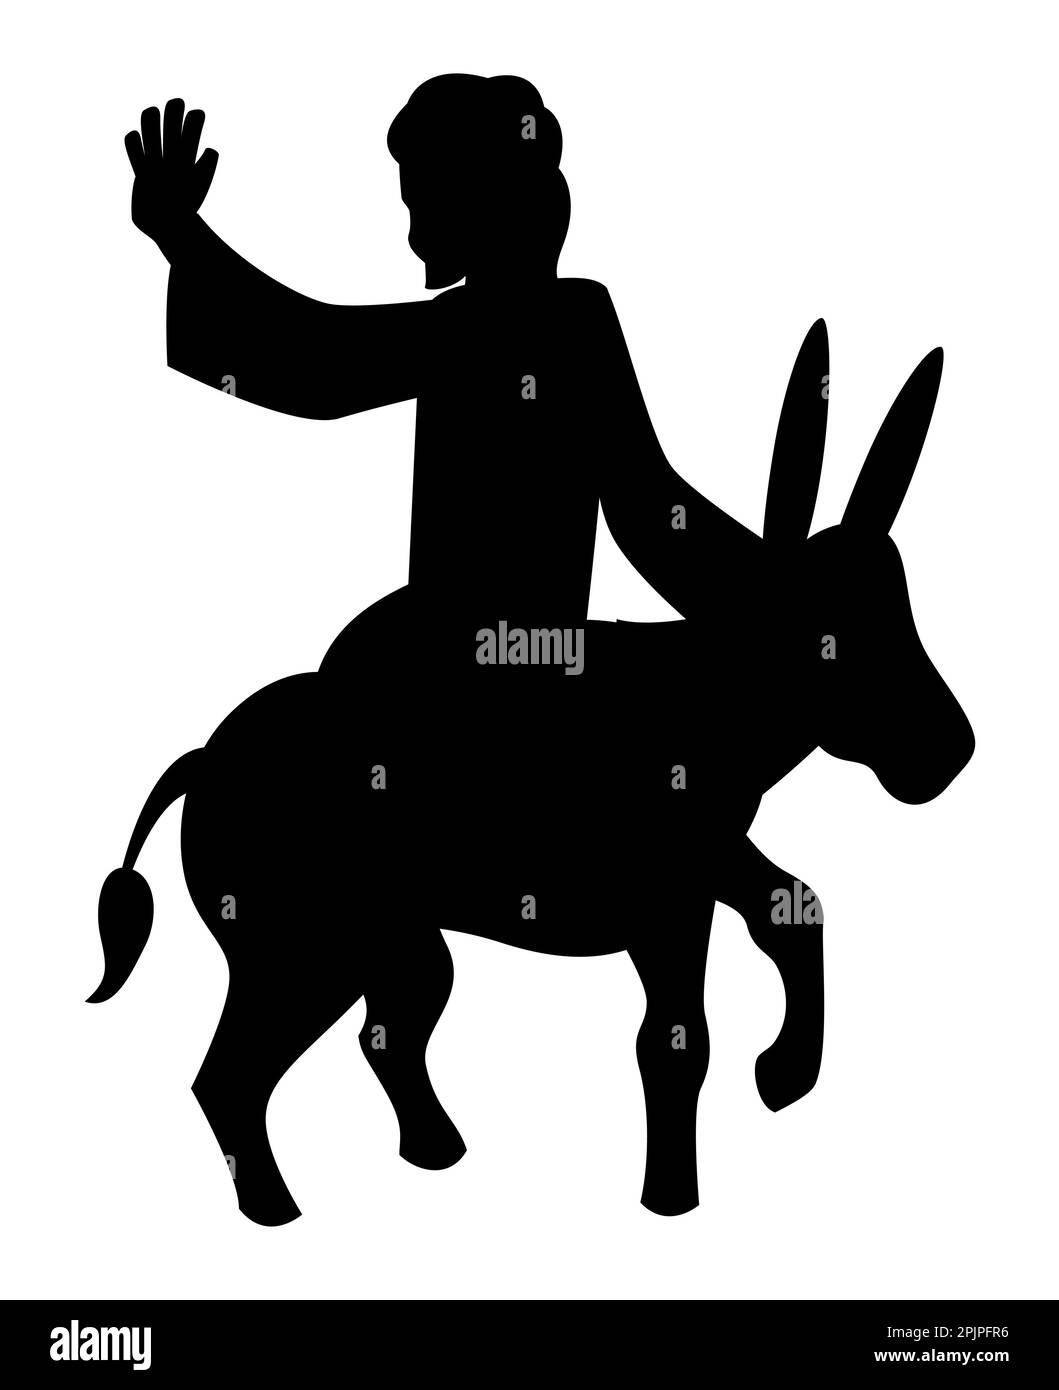 Black religious silhouette depicting Jesus riding a donkey on his entry into Jerusalem, during Palm Sunday. Stock Vector